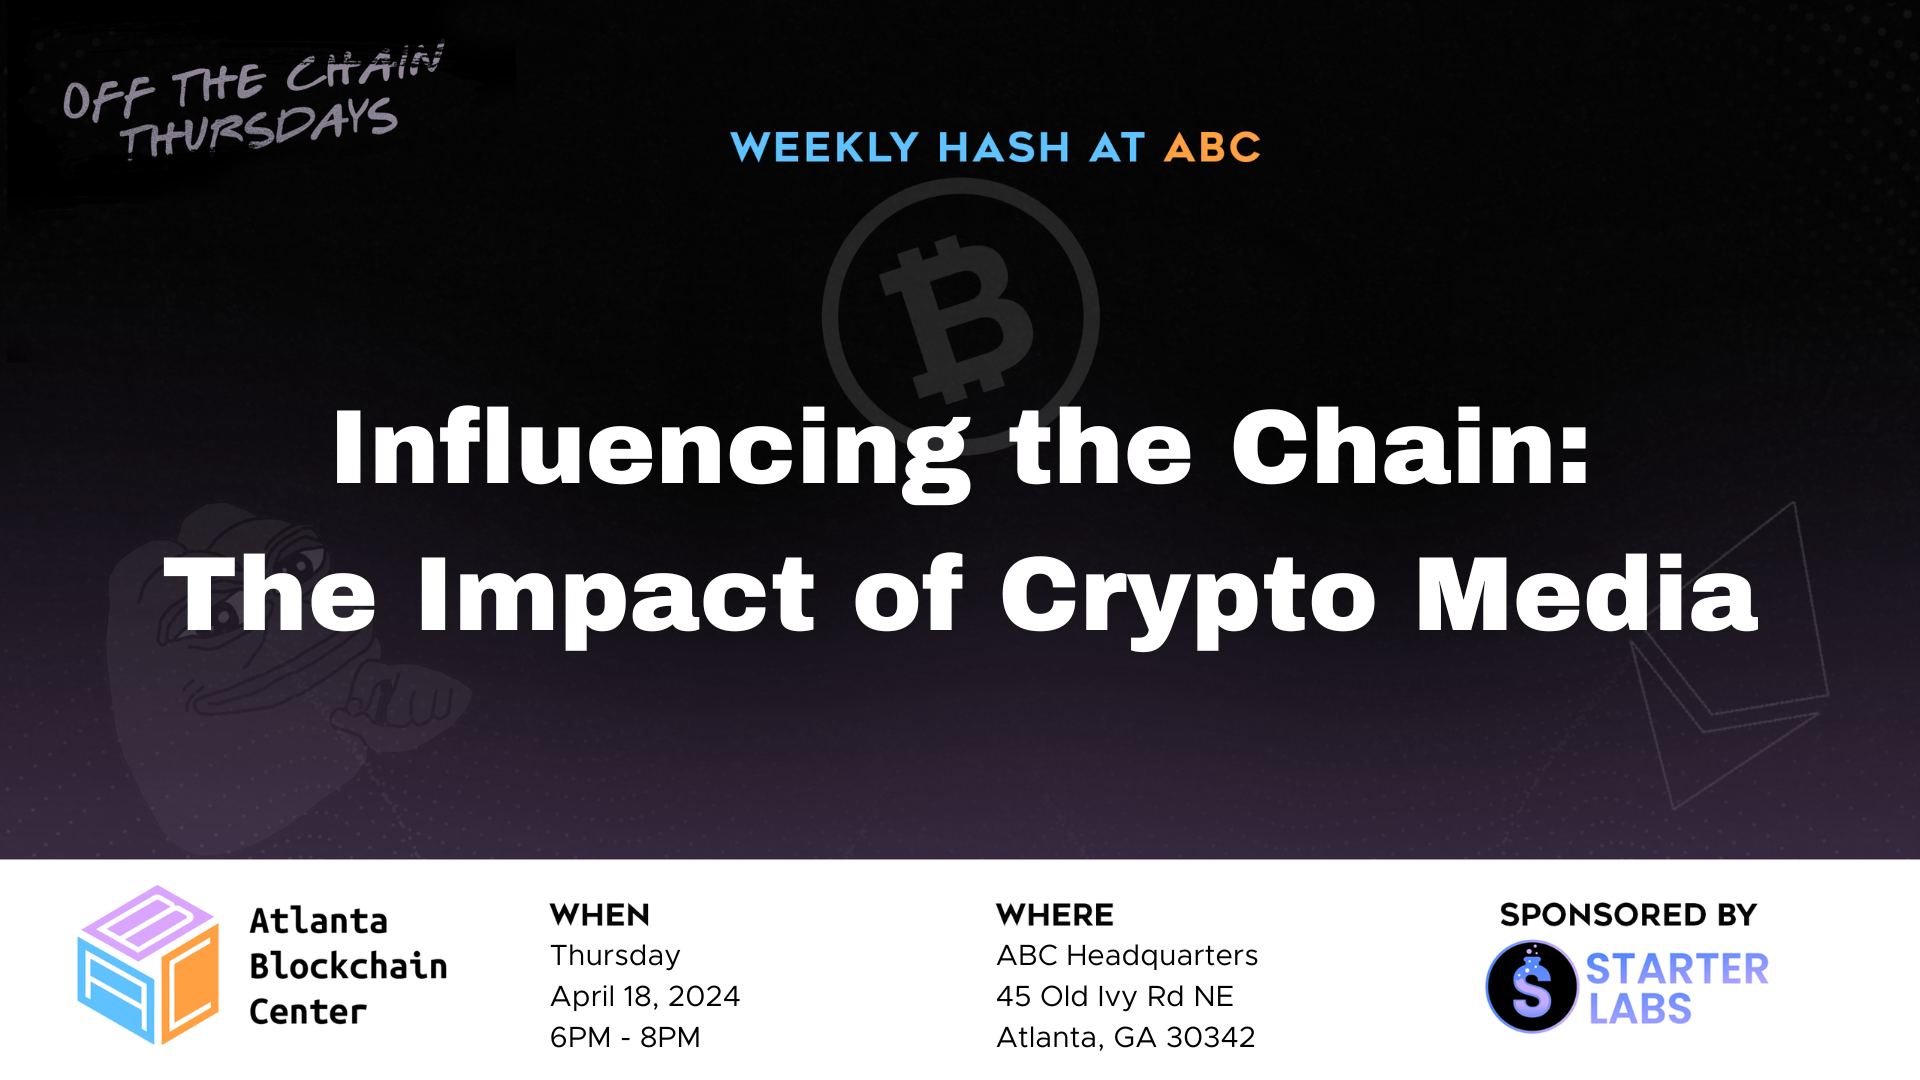 Influencing the Chain: The Impact of Crypto Media